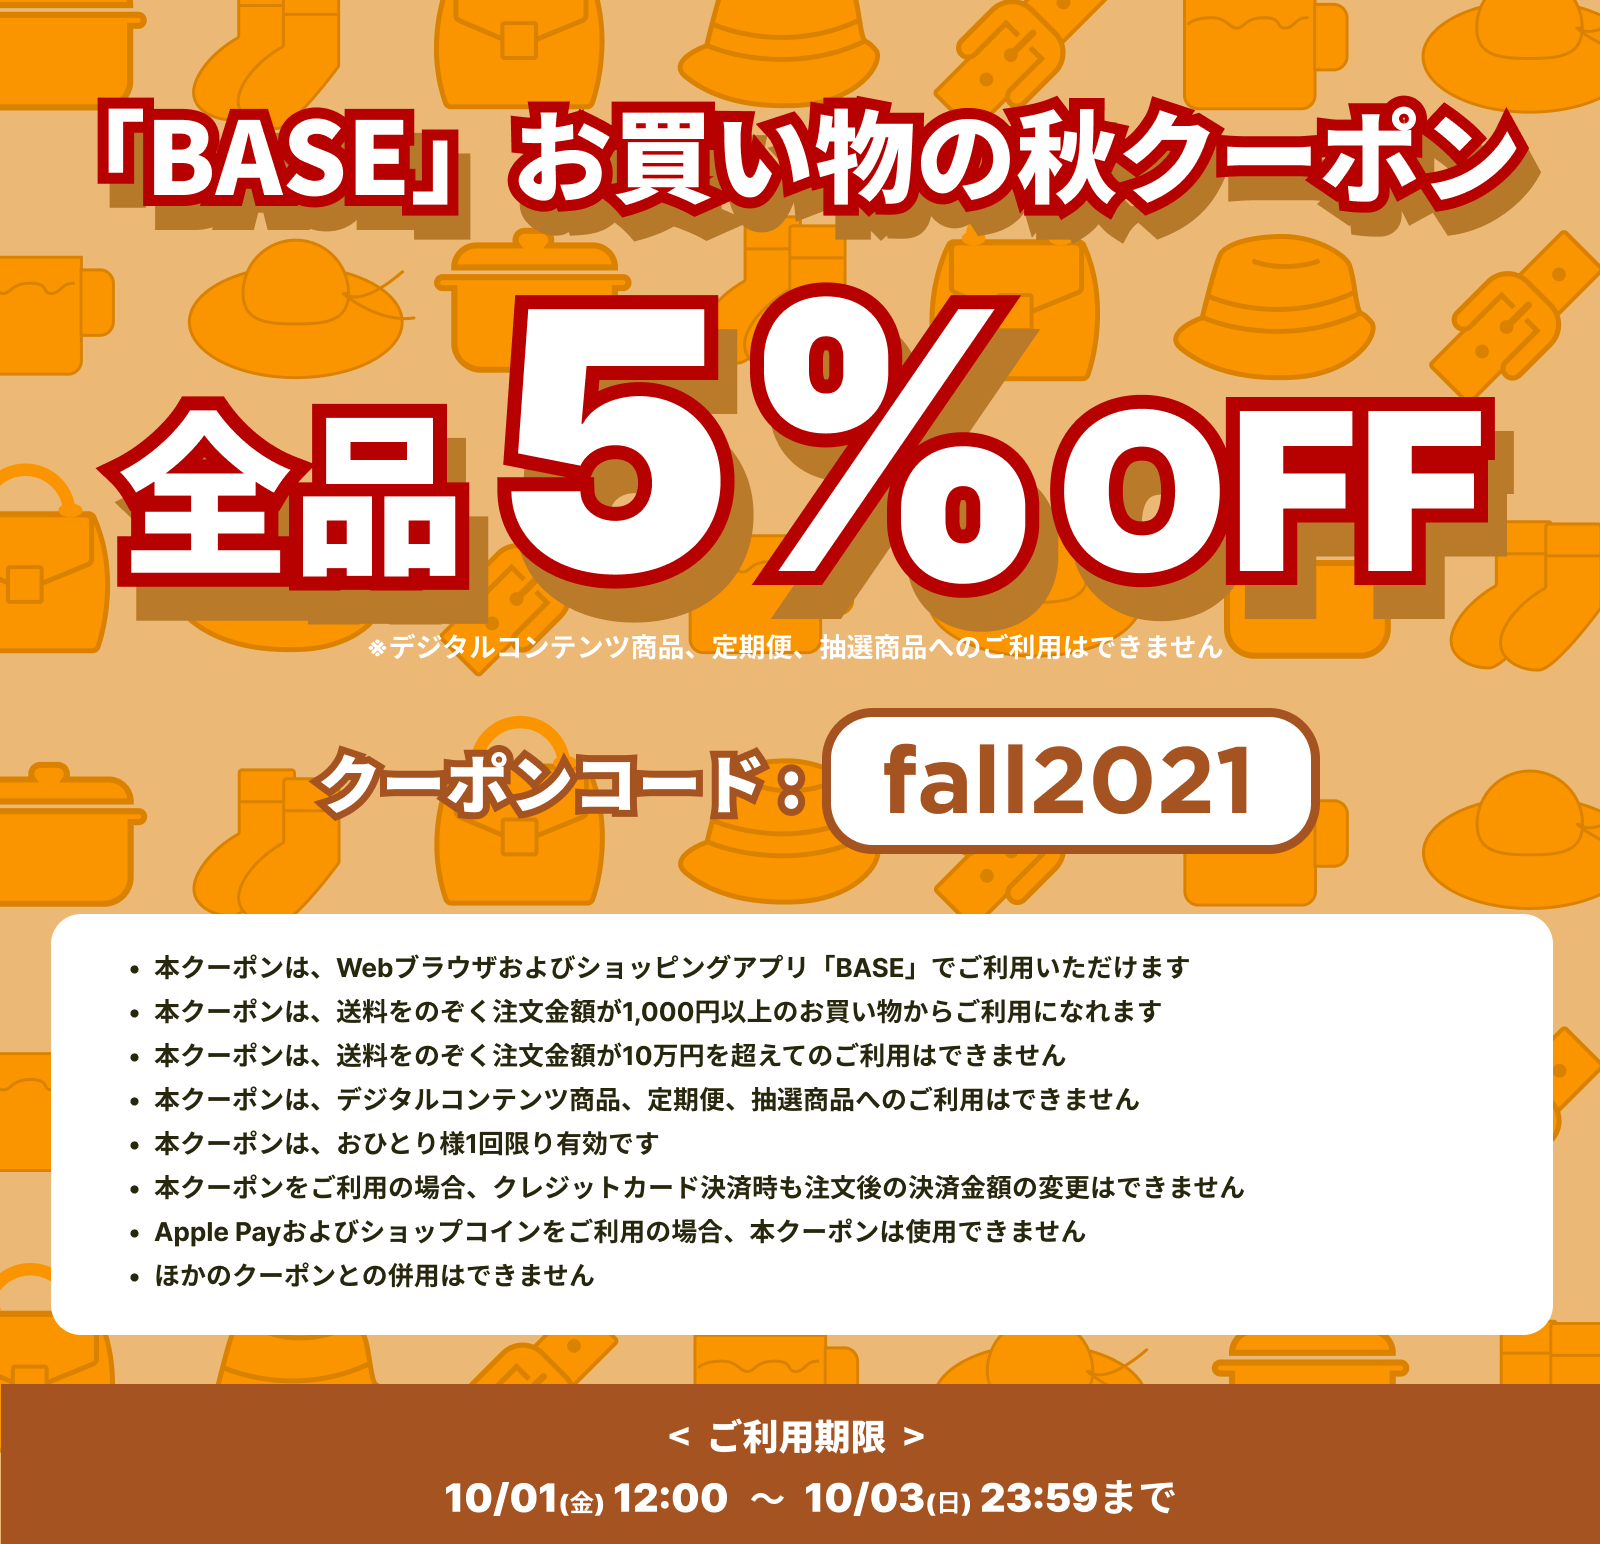 5%OFFクーポンプレゼント！！